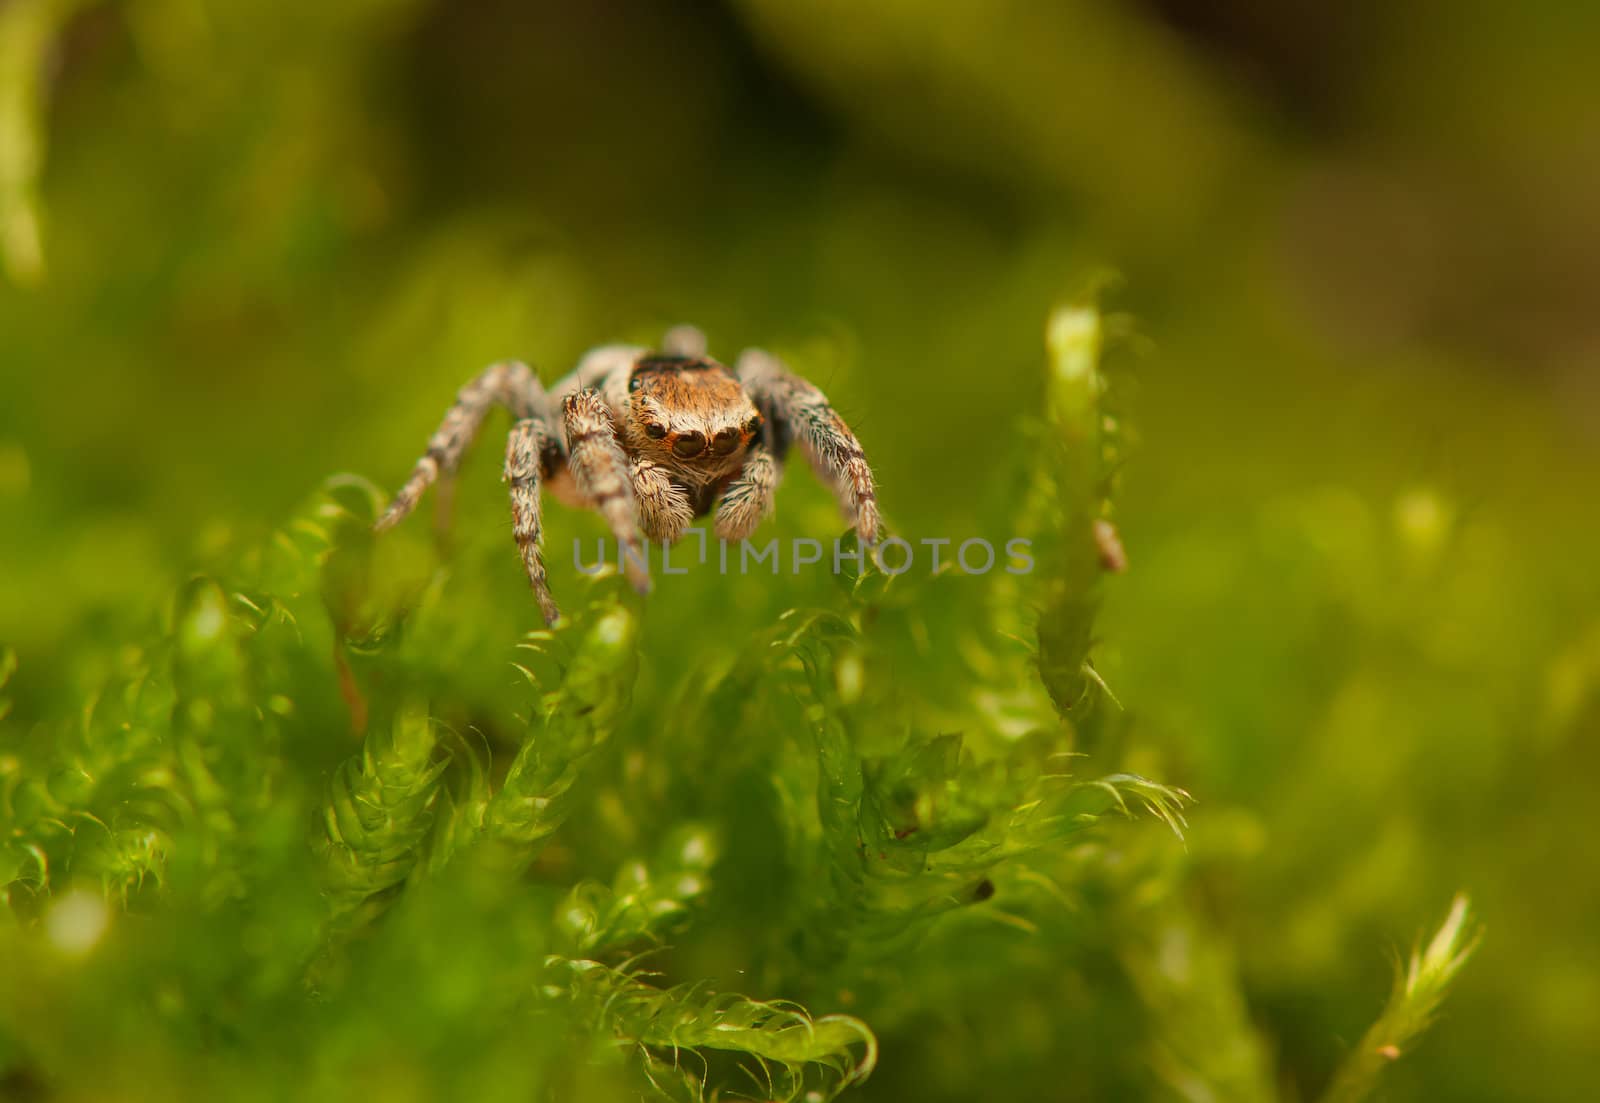 Evarcha - Jumping spider by Gucio_55